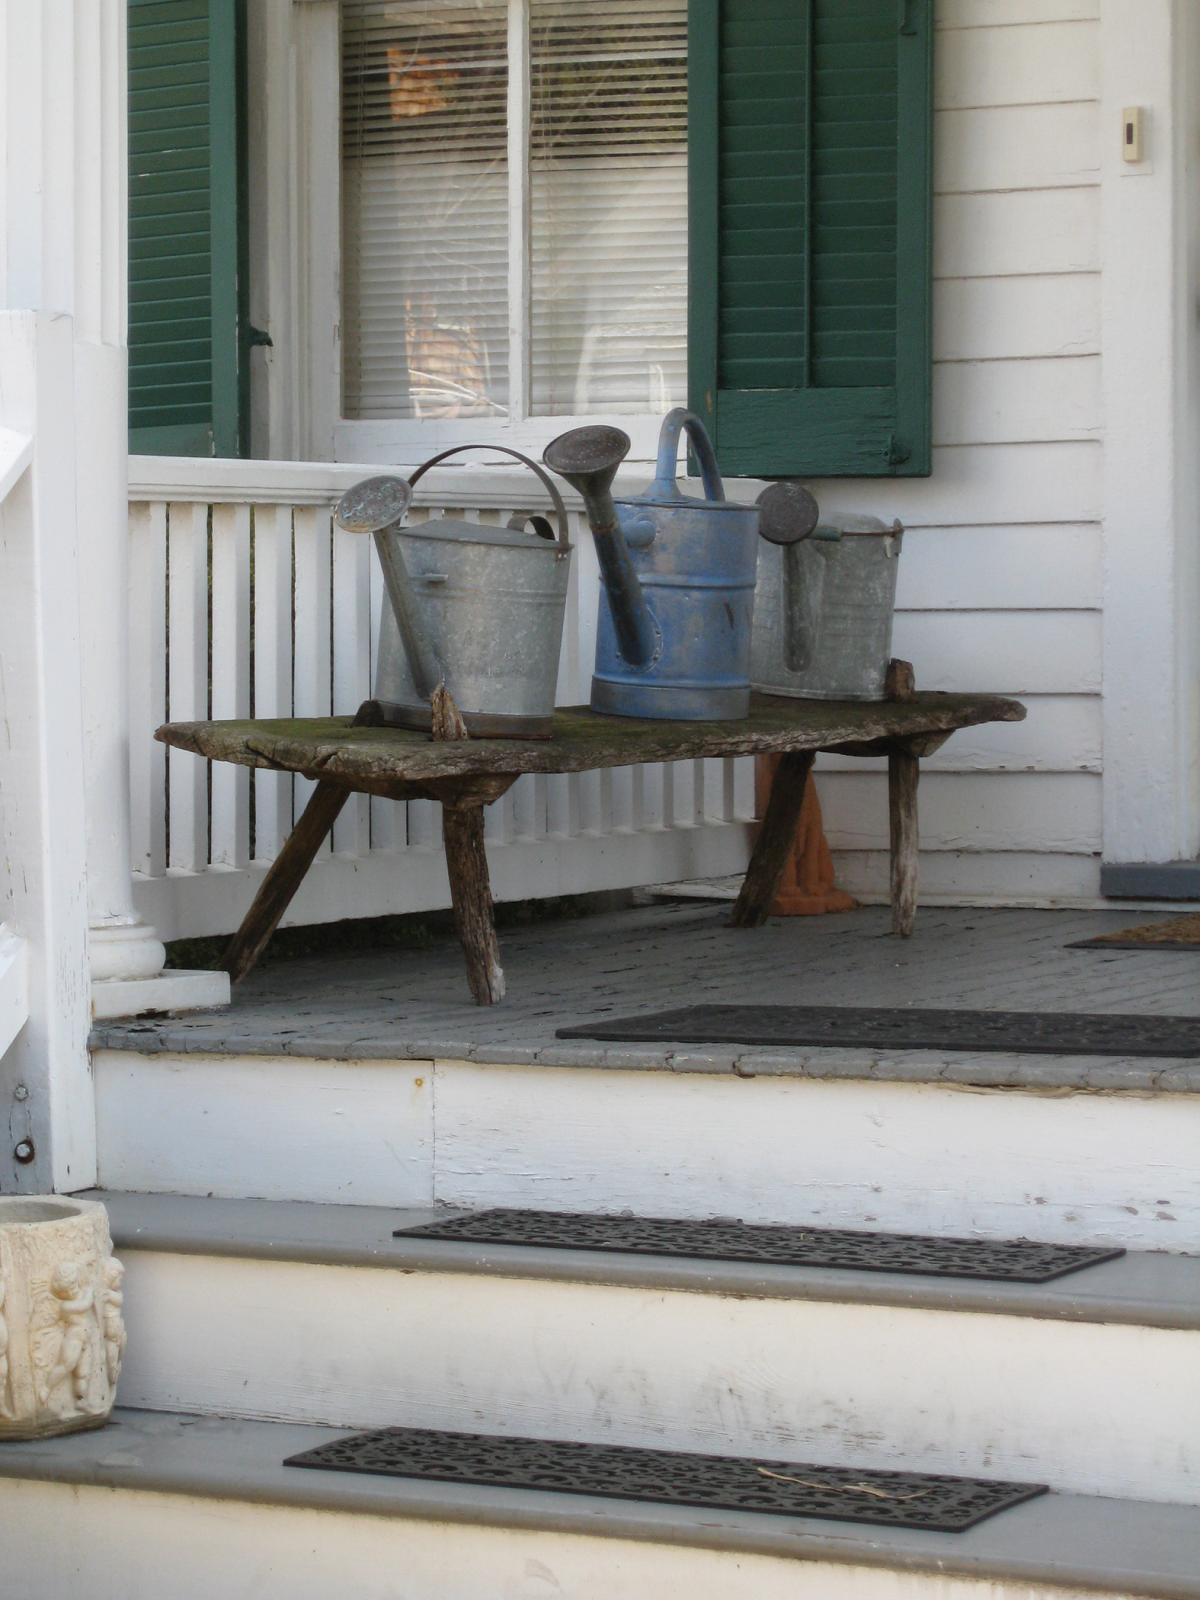 Photograph of front porch, bench with metal buckets on it